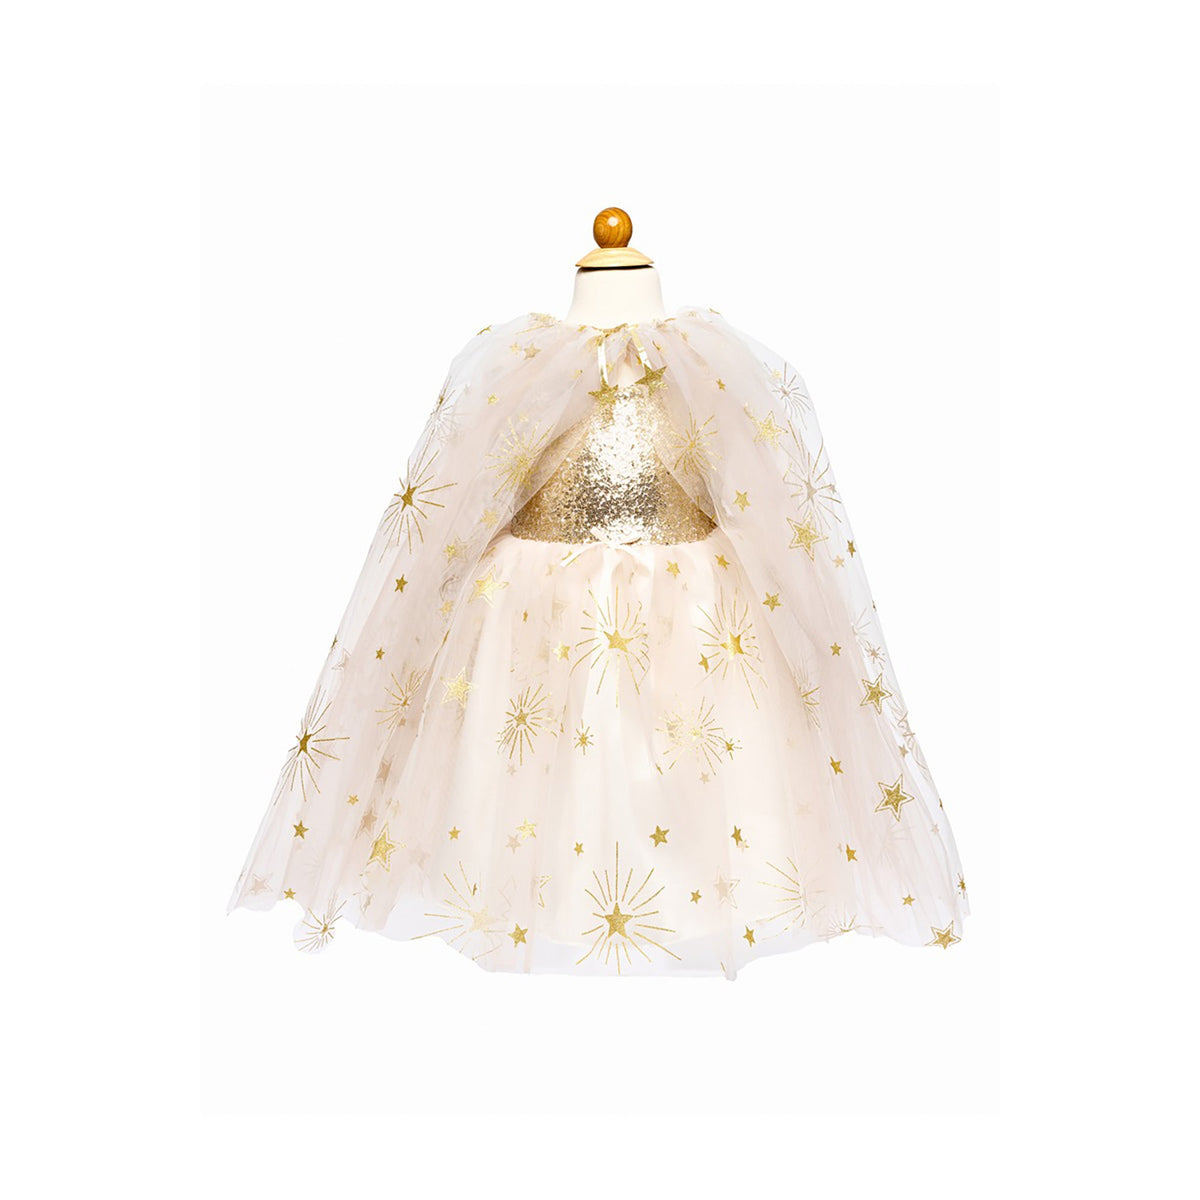 Great Pretenders Costume Accessories Gold Glam Party Cape for Kids 771877507557